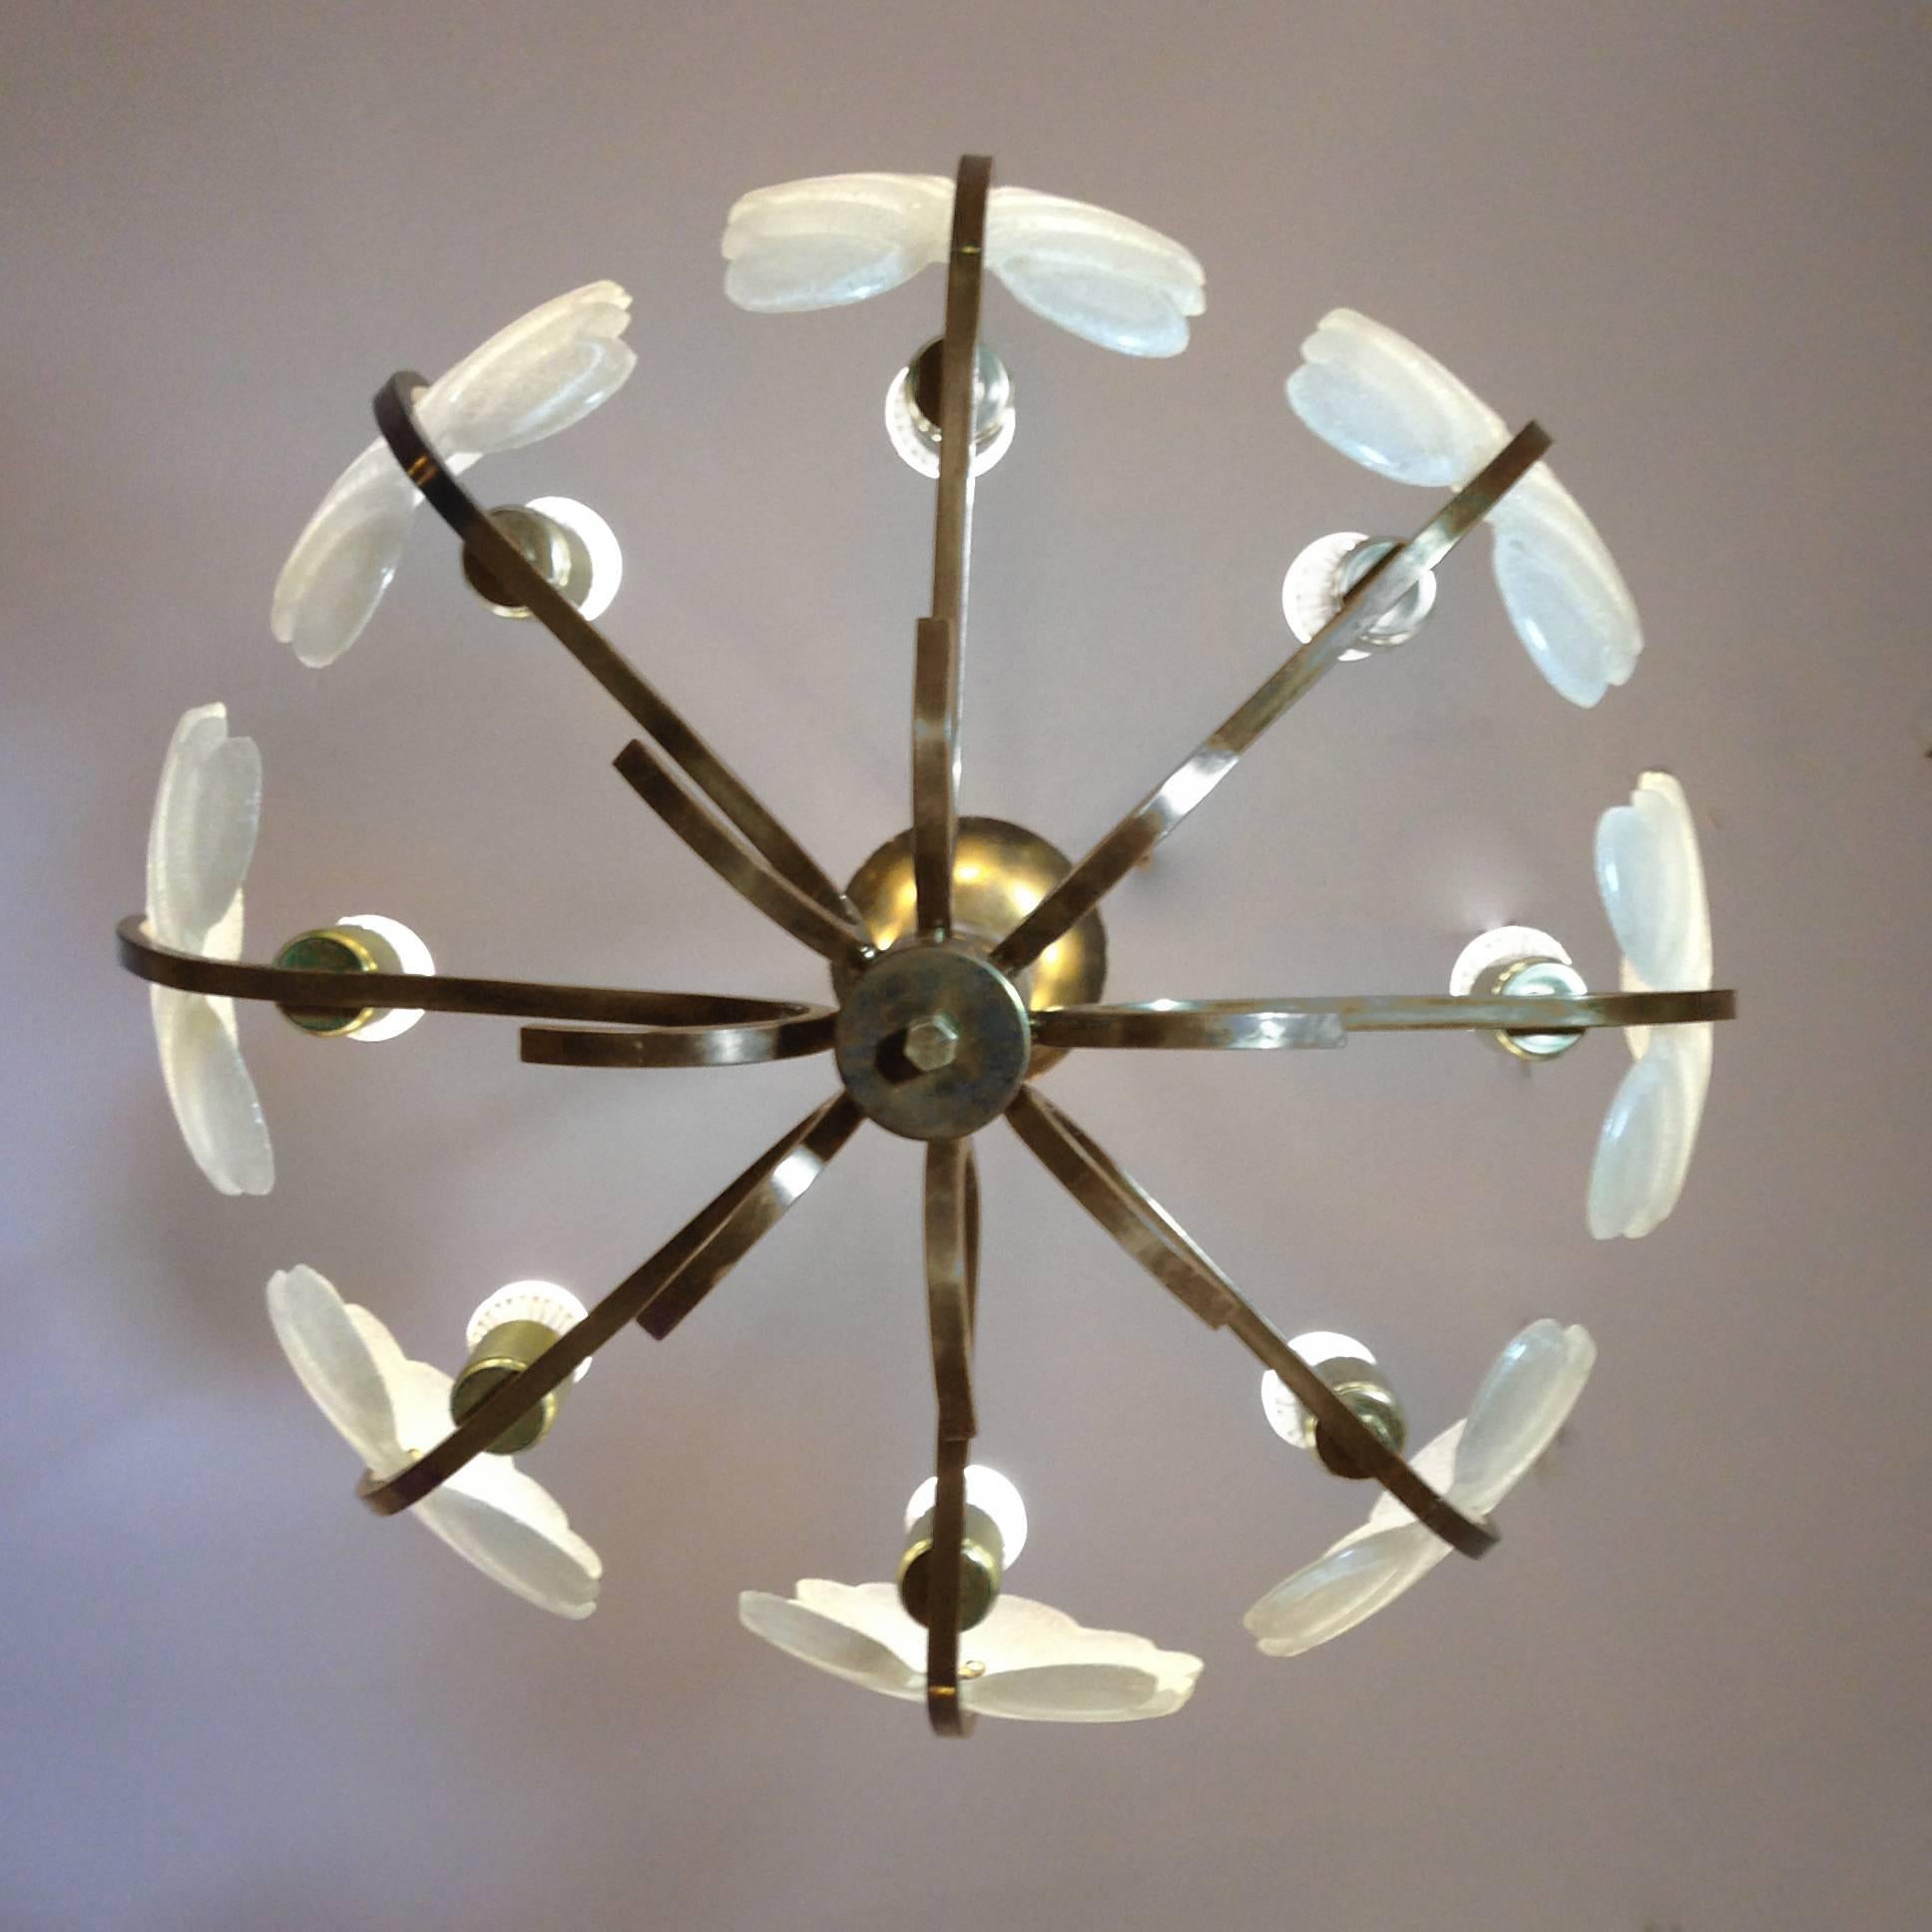 Large chandelier by Carl Fagerlund for Orrefors. Eight leaves made of frosted glass with eight bronze arms.